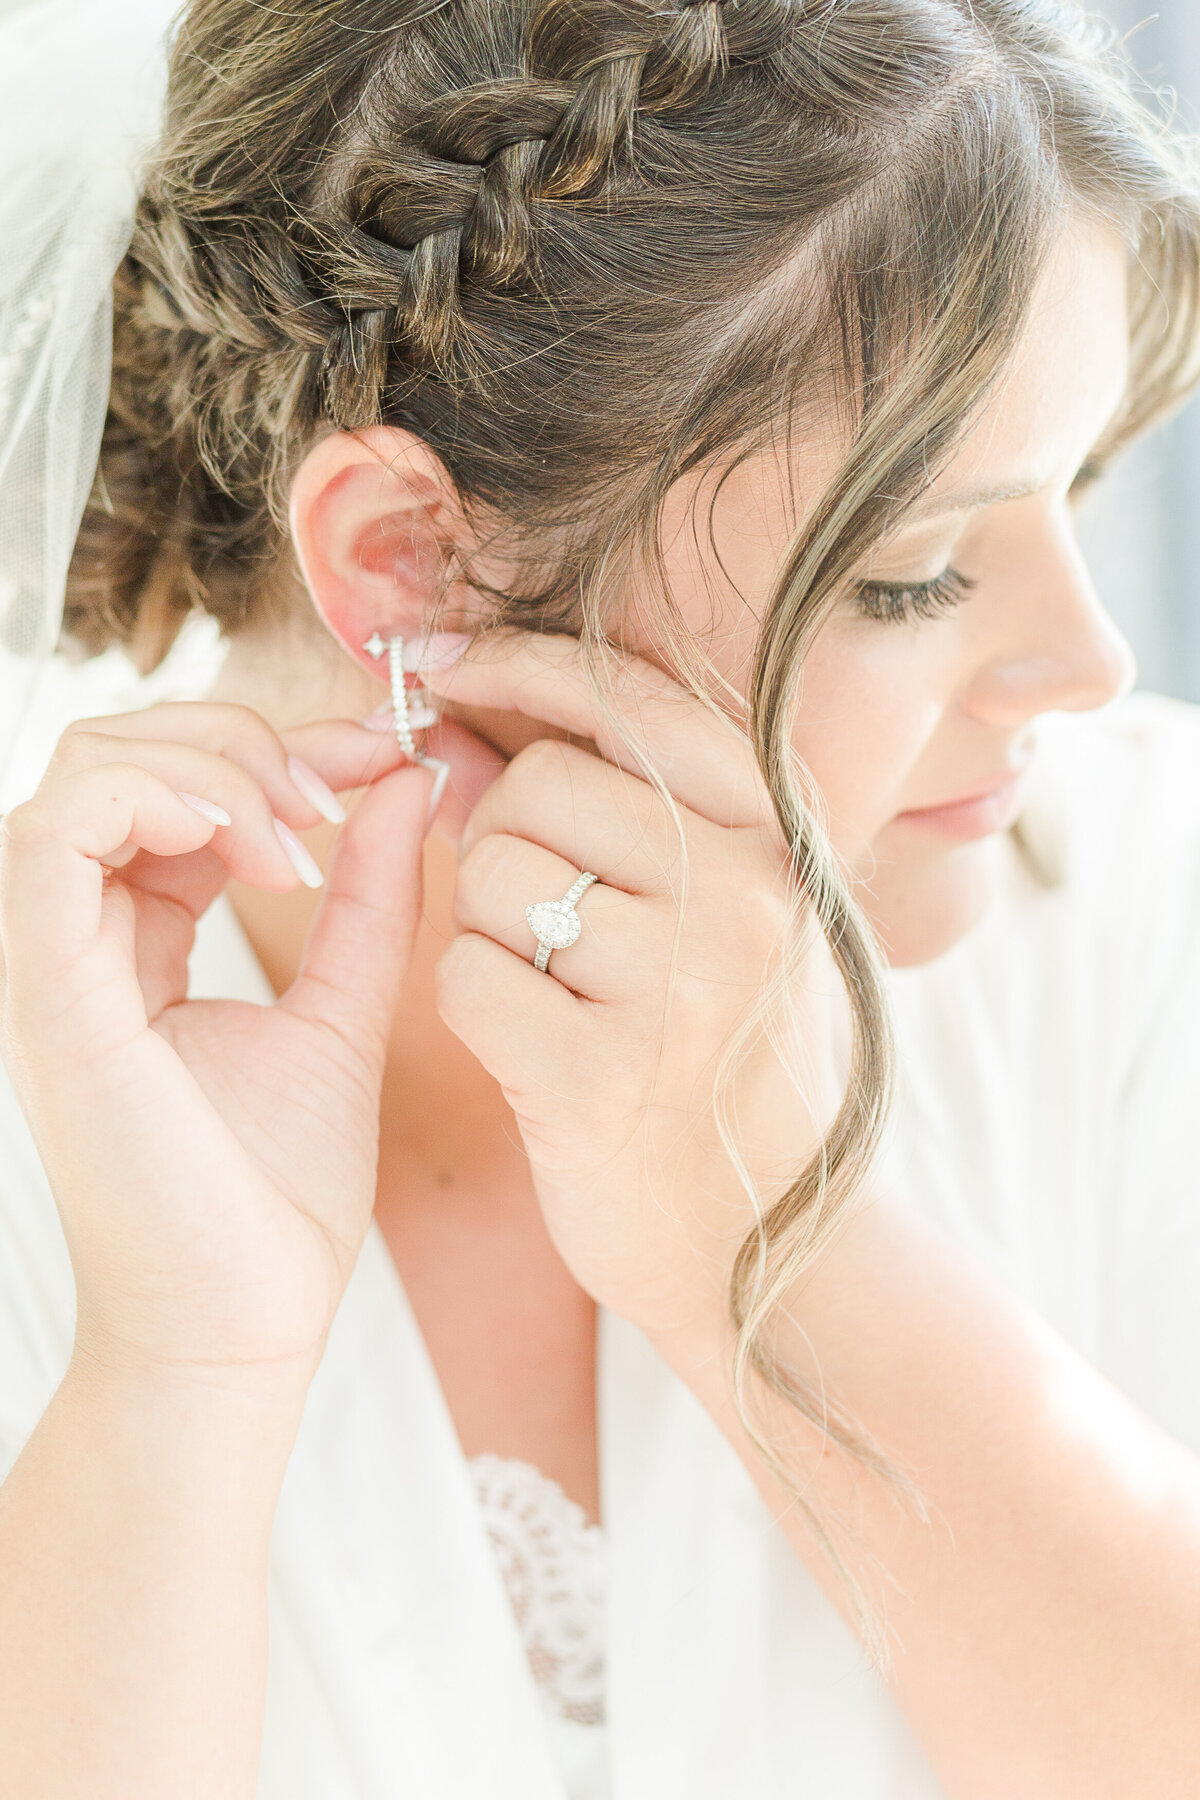 Bride's getting ready image. The bride is captured putting on her earring with her engagement ring featured. Captured by Lia Rose Weddings